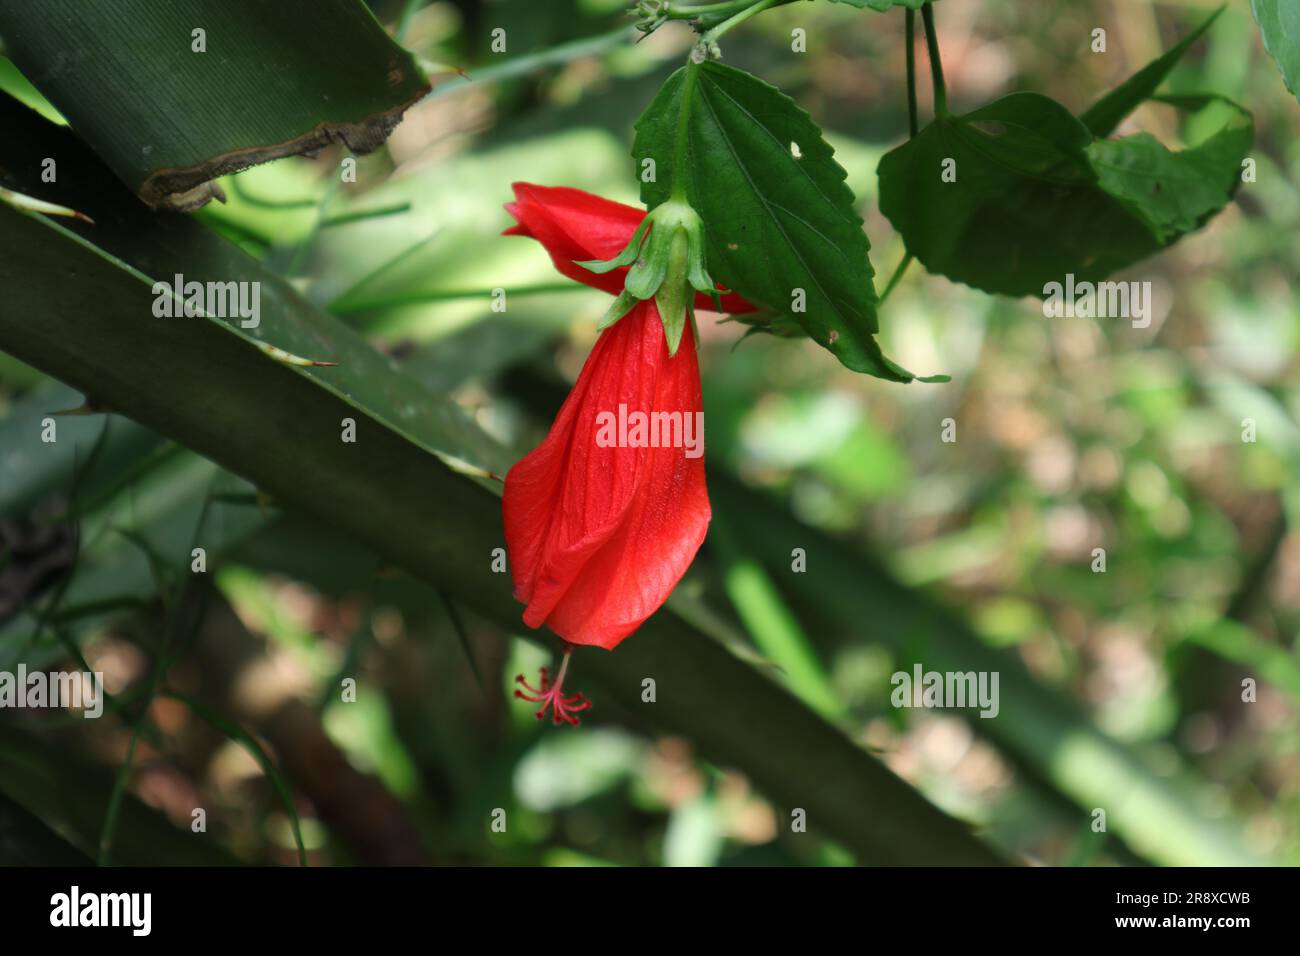 A red color Wax Mallow (Malvaviscus Arboreus) flower in the backyard Stock Photo